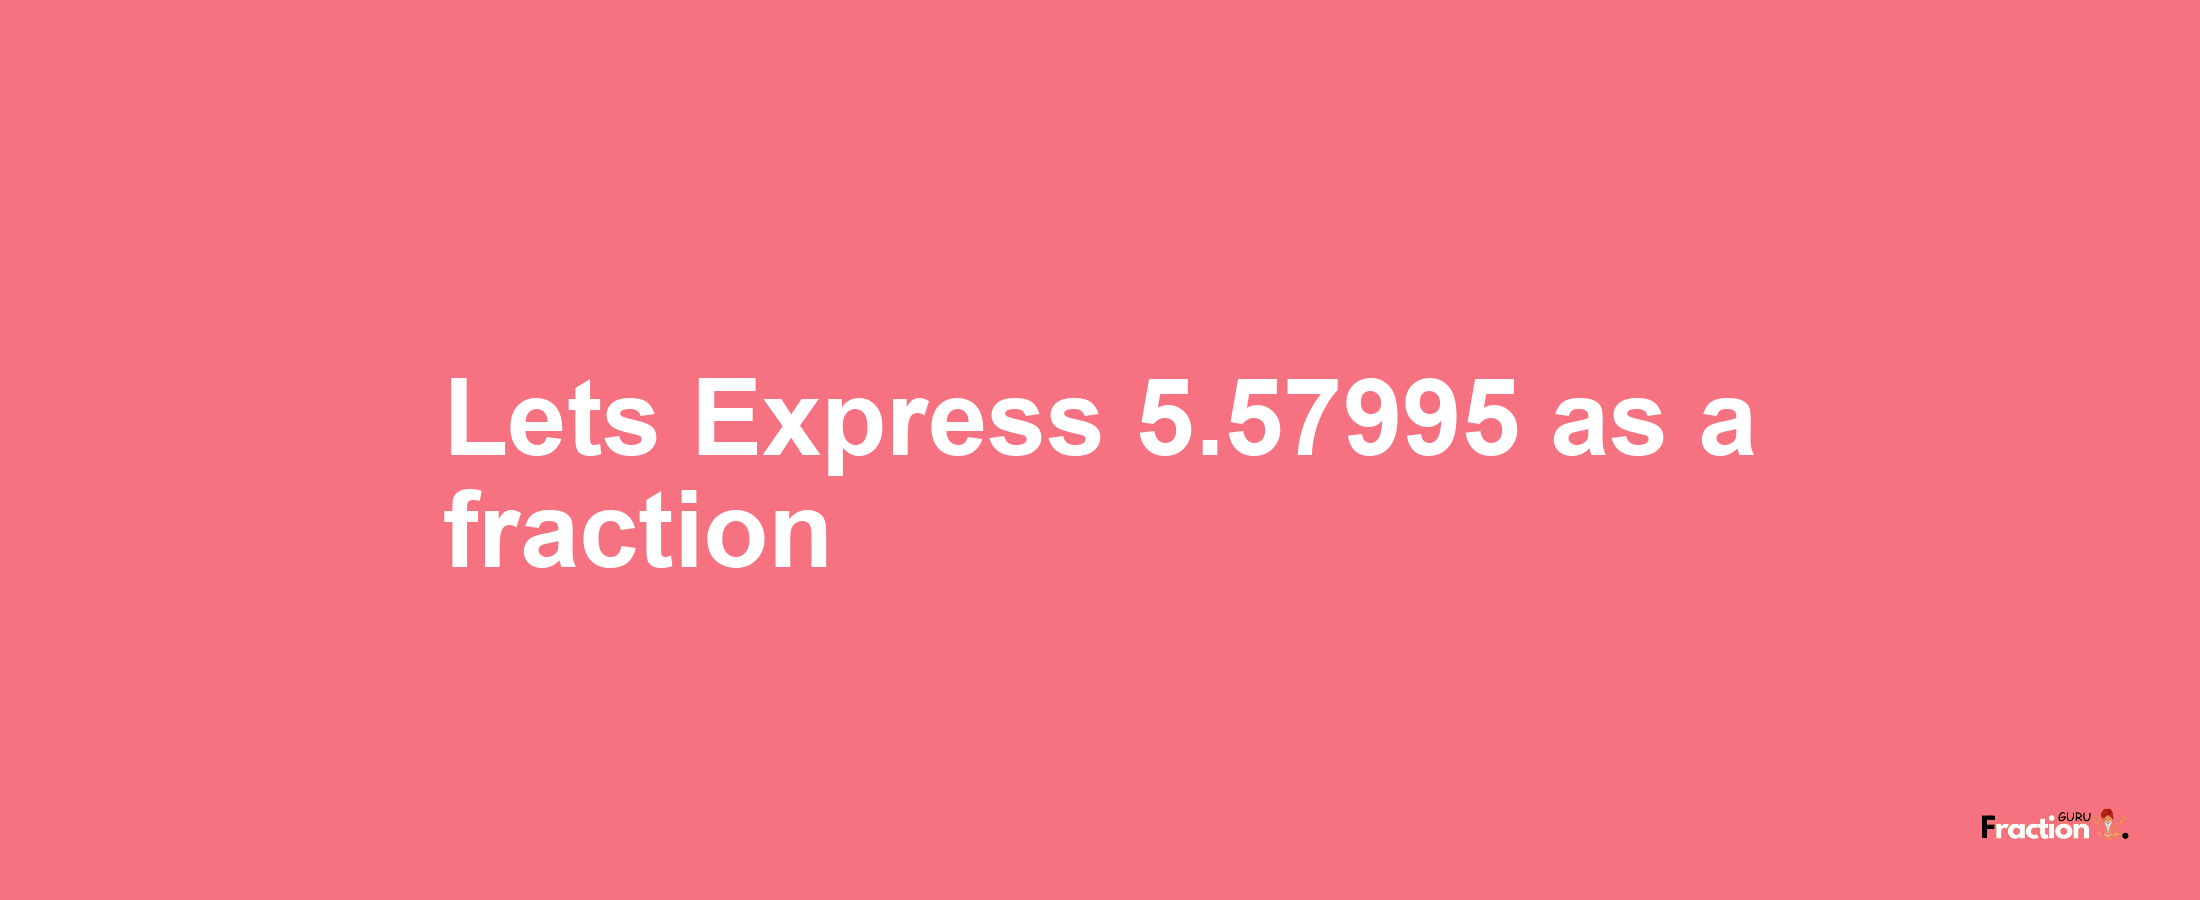 Lets Express 5.57995 as afraction